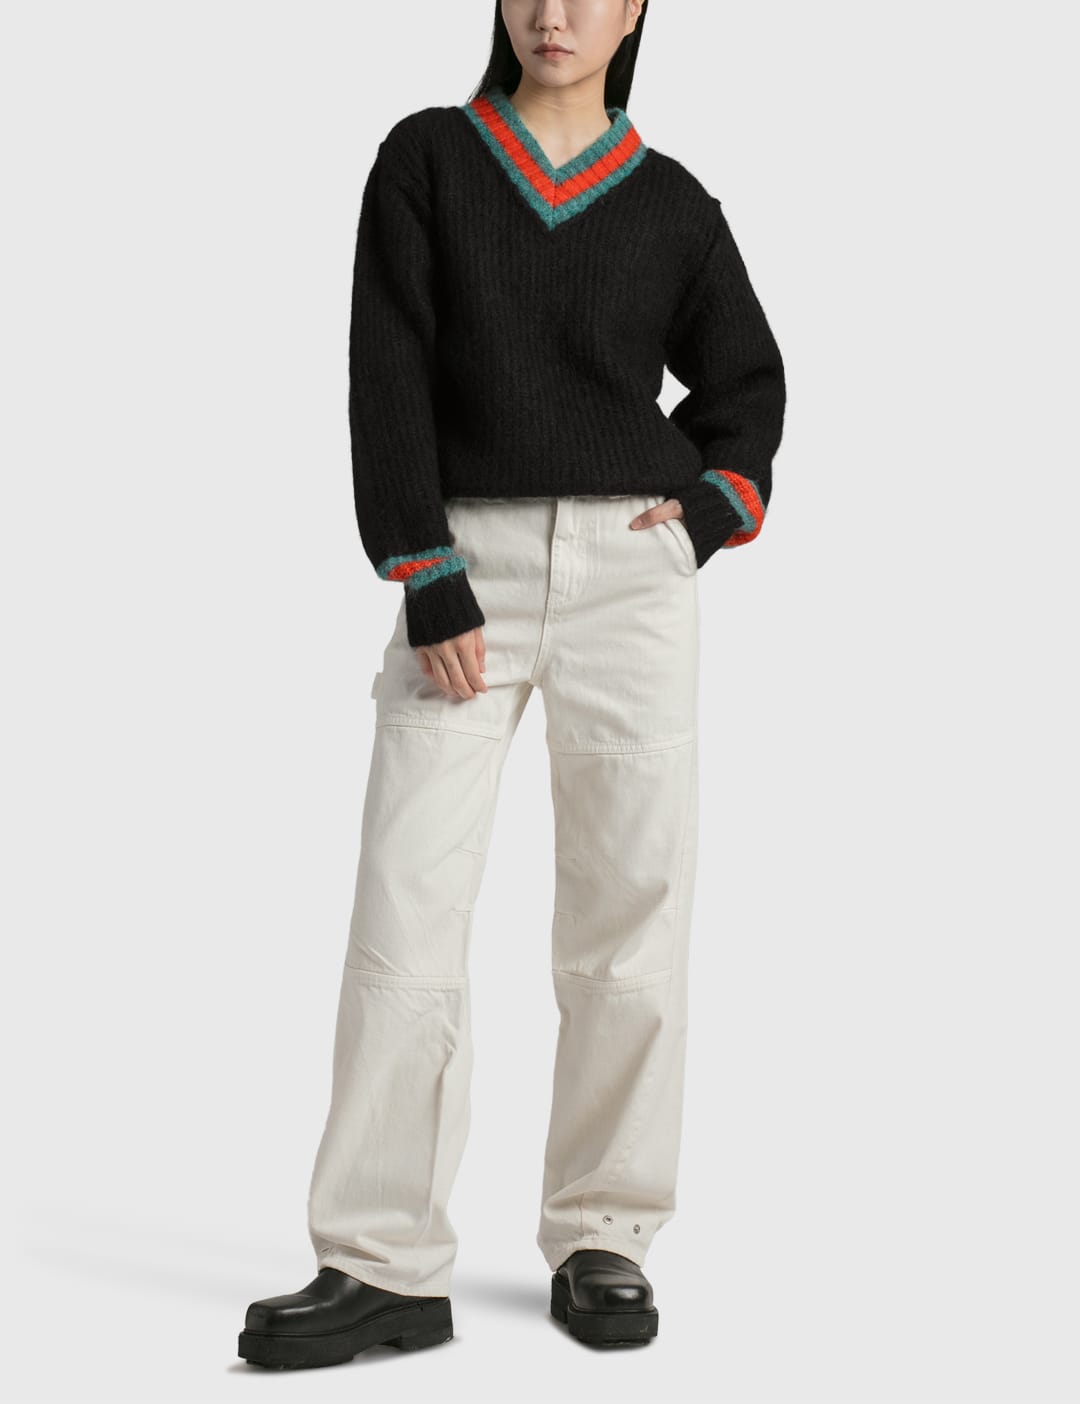 Stüssy - Mohair Tennis Sweater | HBX - Globally Curated Fashion 